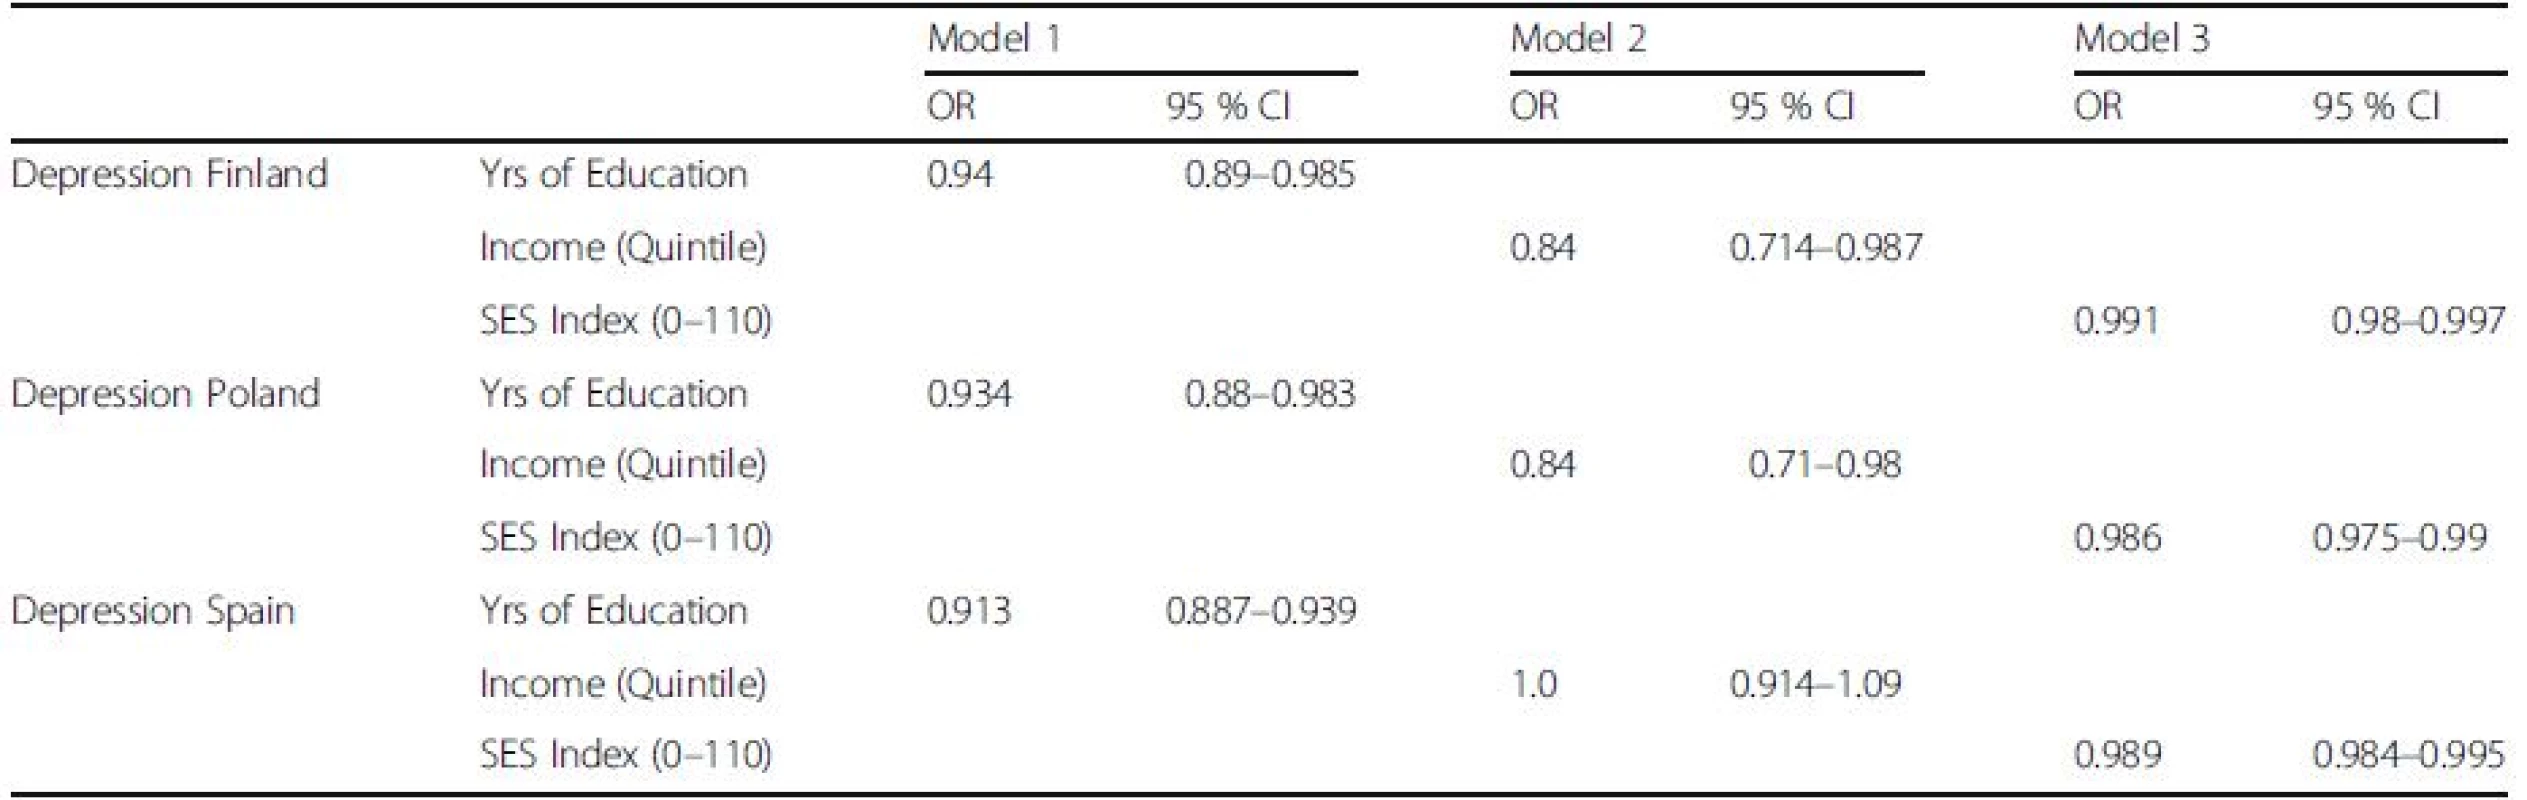 Results from the multivariable logistic regression analysis on the association between indices of socio-economic status on depression by country